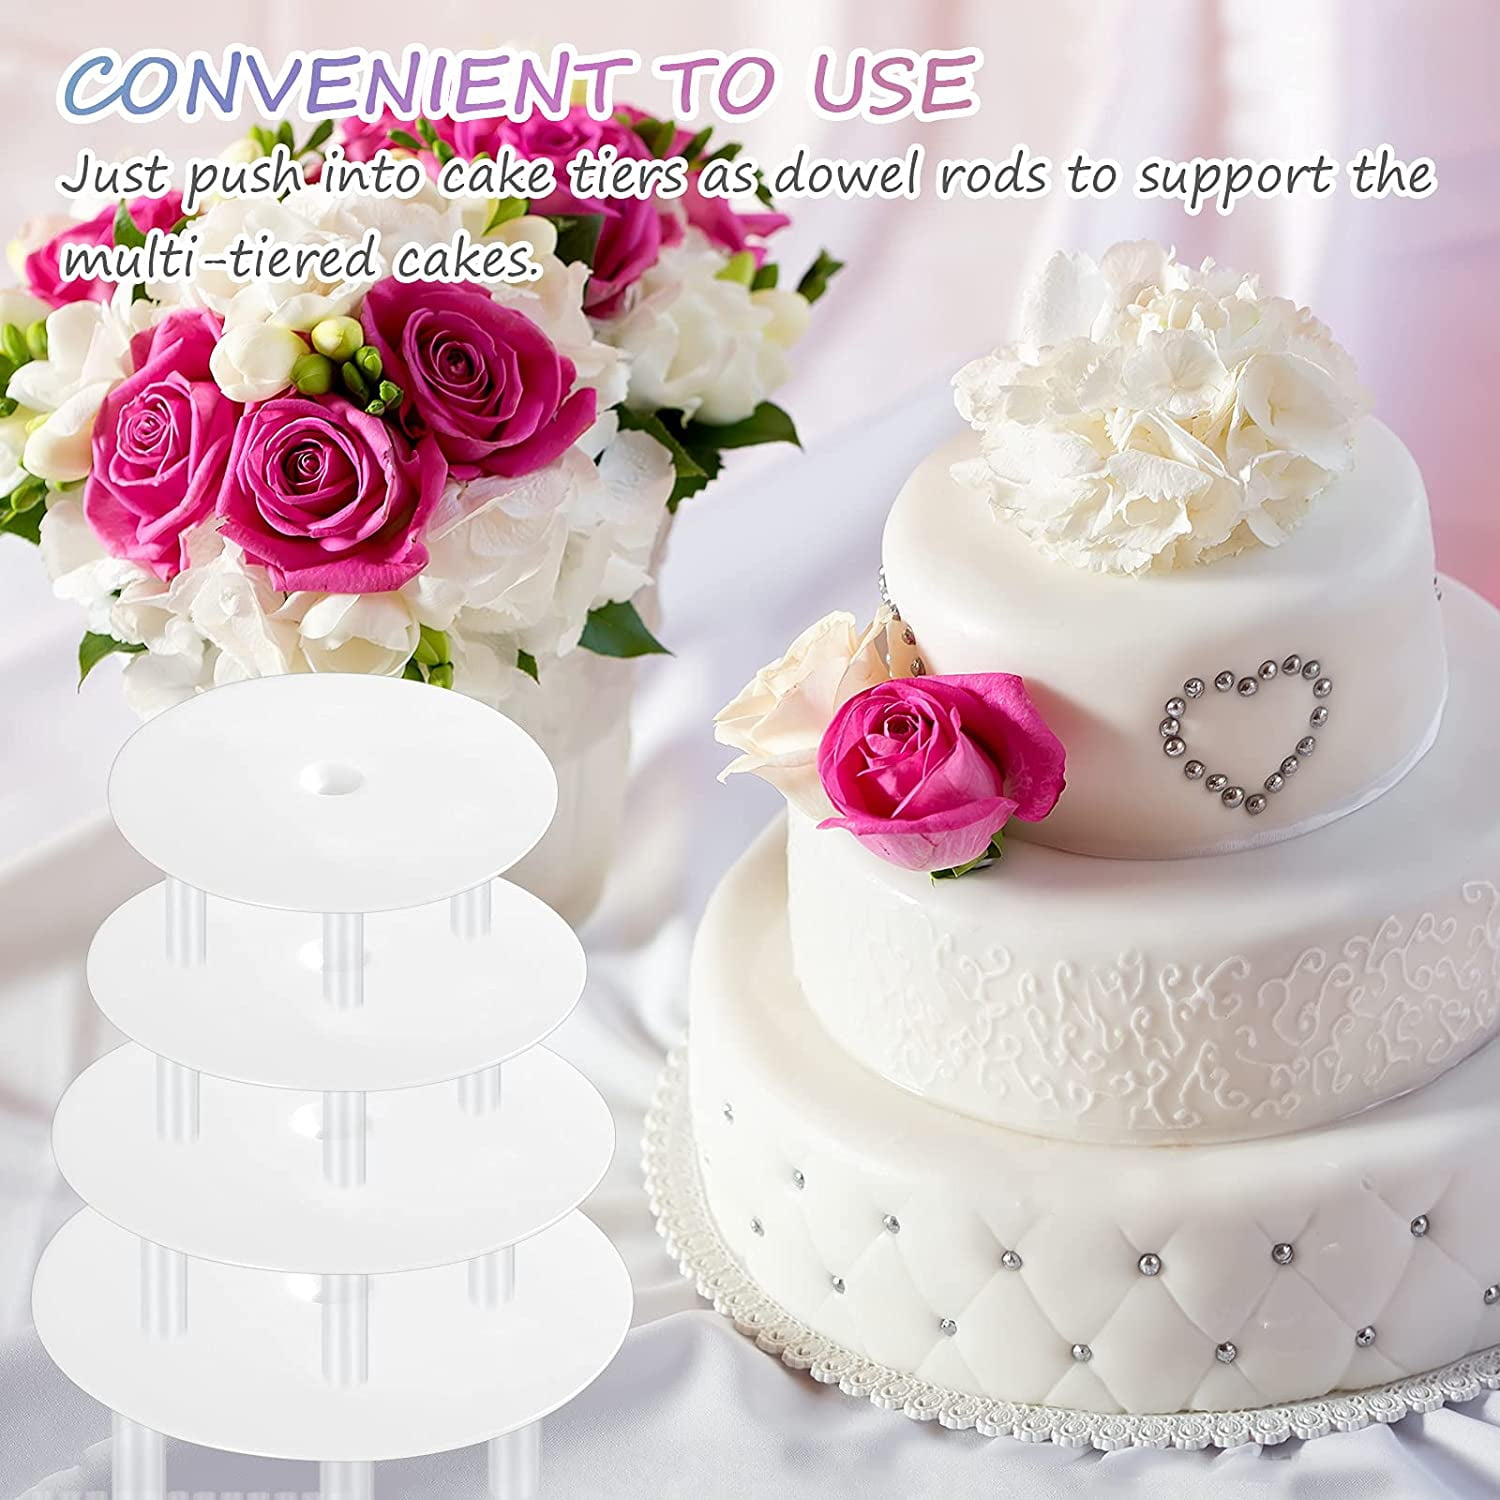 Plastic Cake Dowel Rods Set-for 4,6,8,10 Inch Cakes,with 4 Smiley Cake Dividers and 20 White Plastic Cake Stick Support Bars,12 Transparent Cake Stacking Pins for Layering Cakes